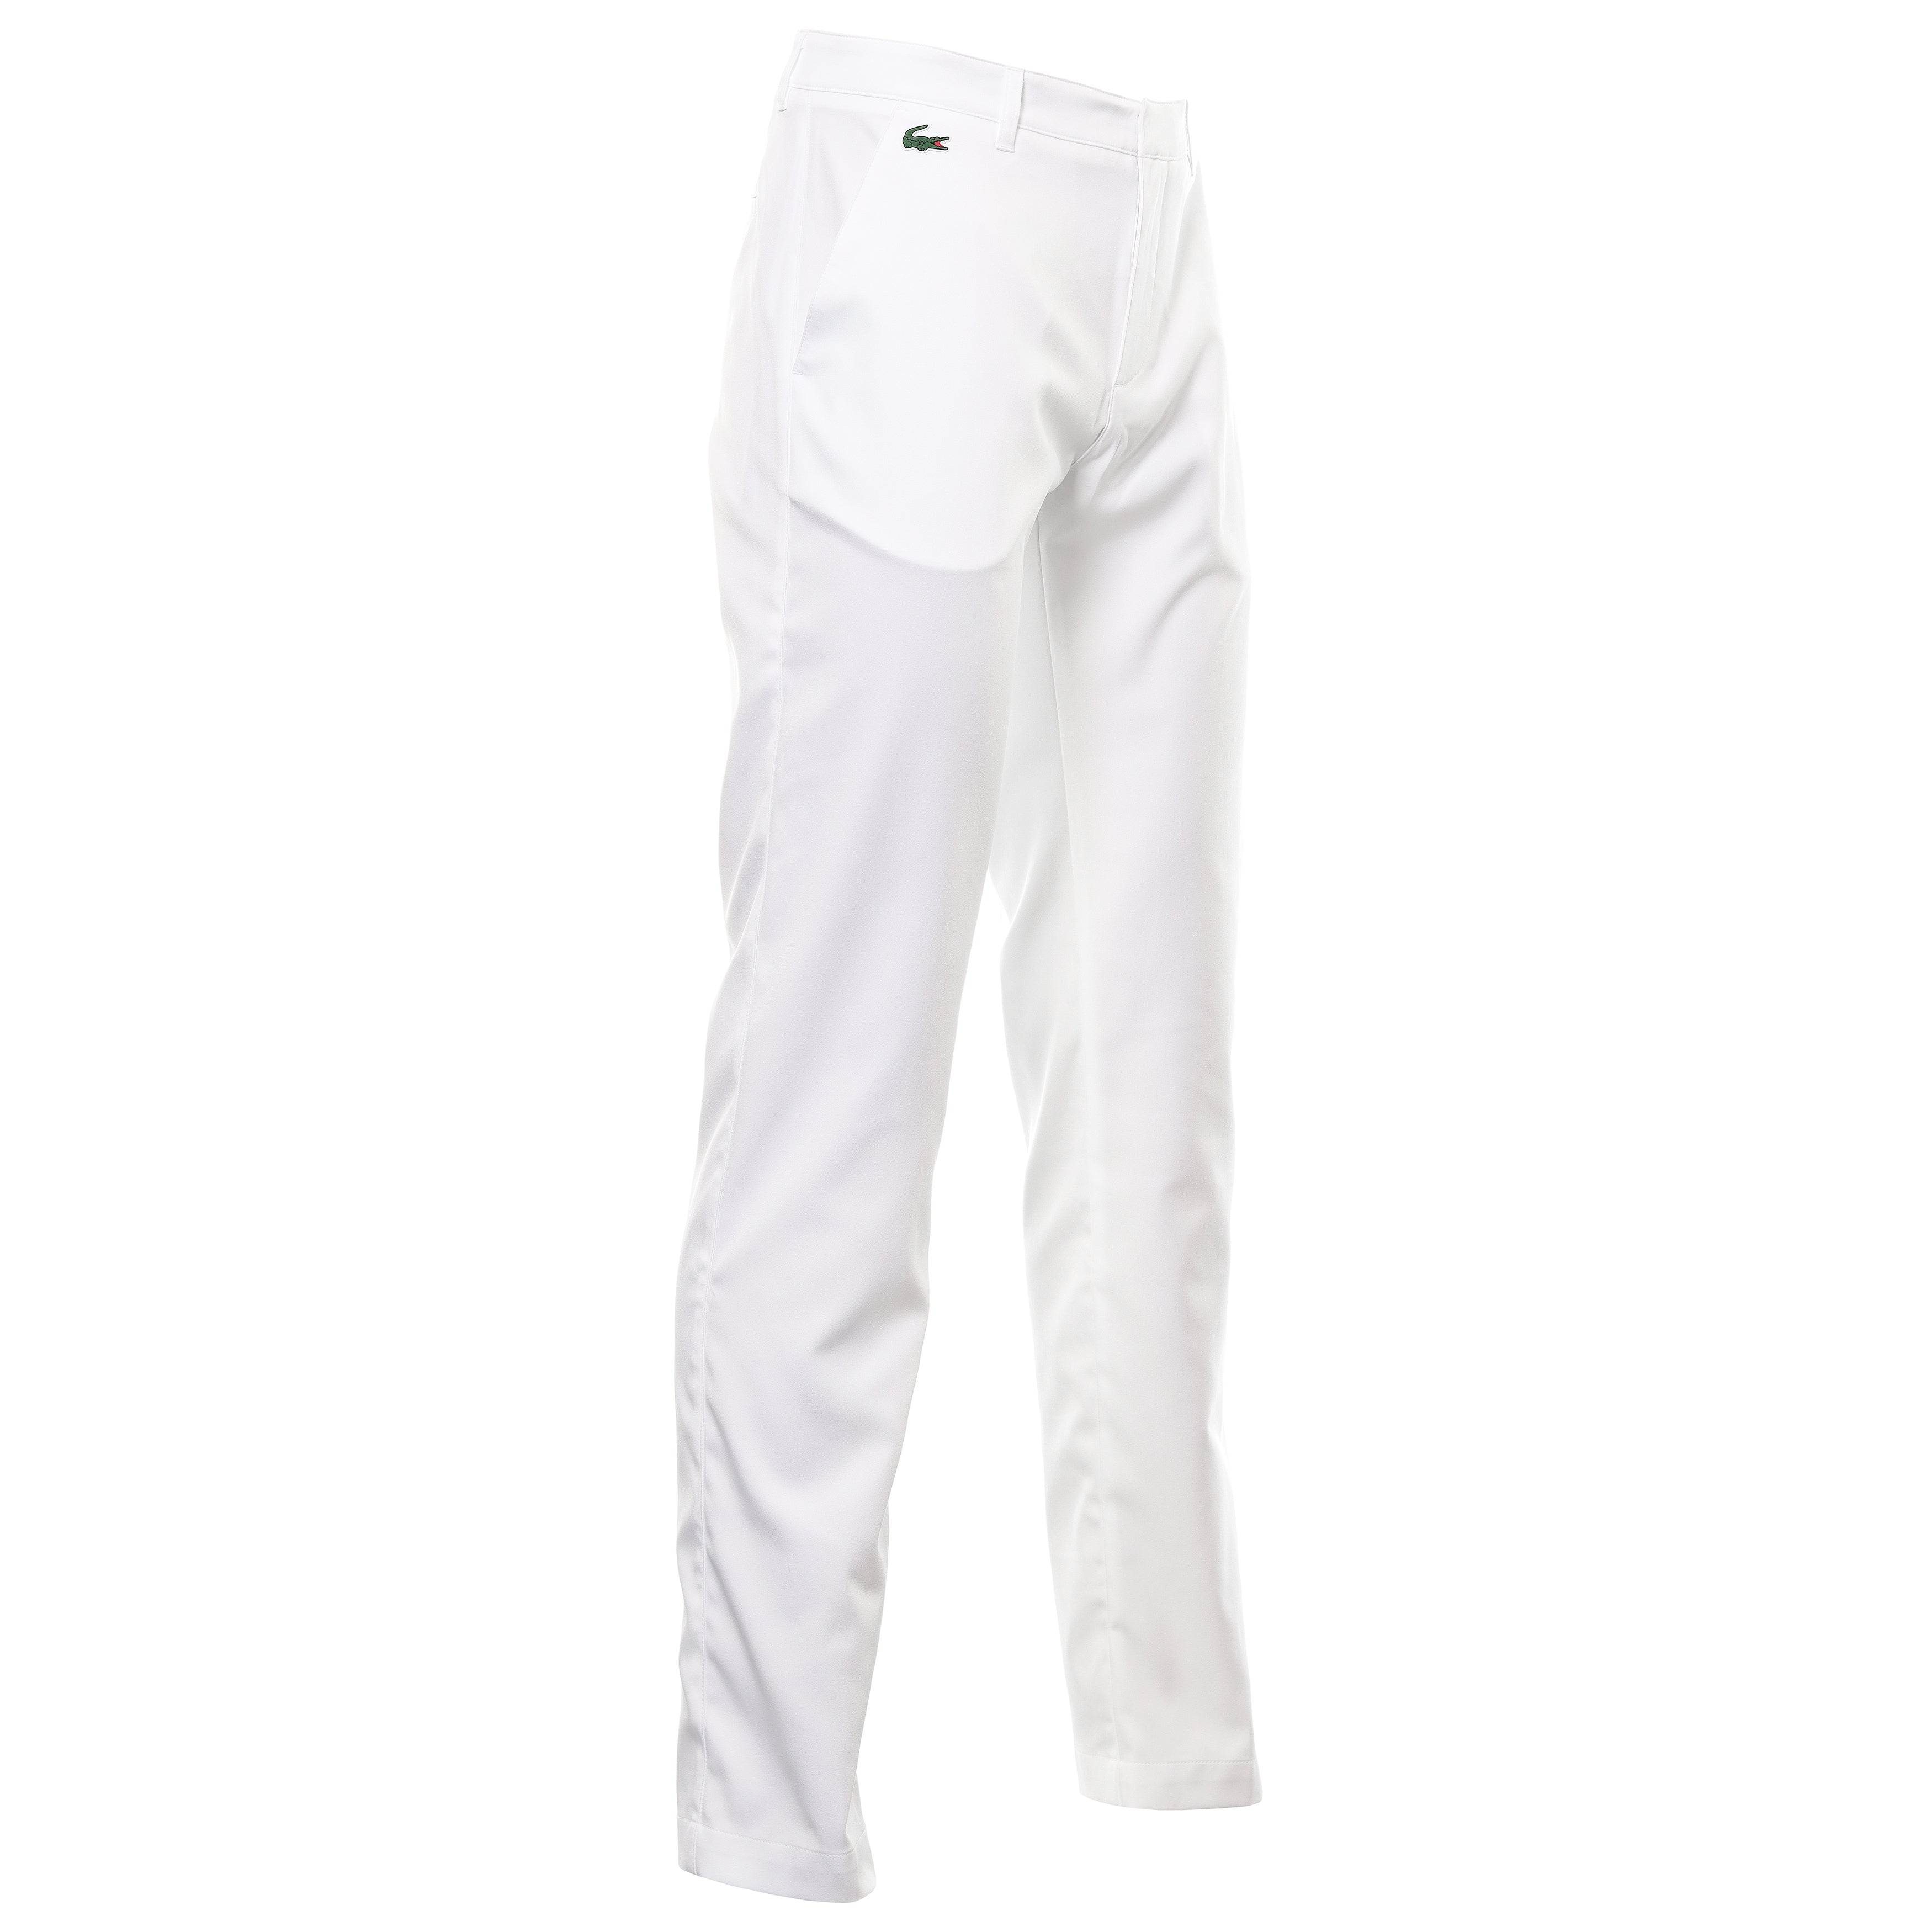 Lacoste Sport Stretch Chino Pants HH3768 001 Function18 | Restrictedgs